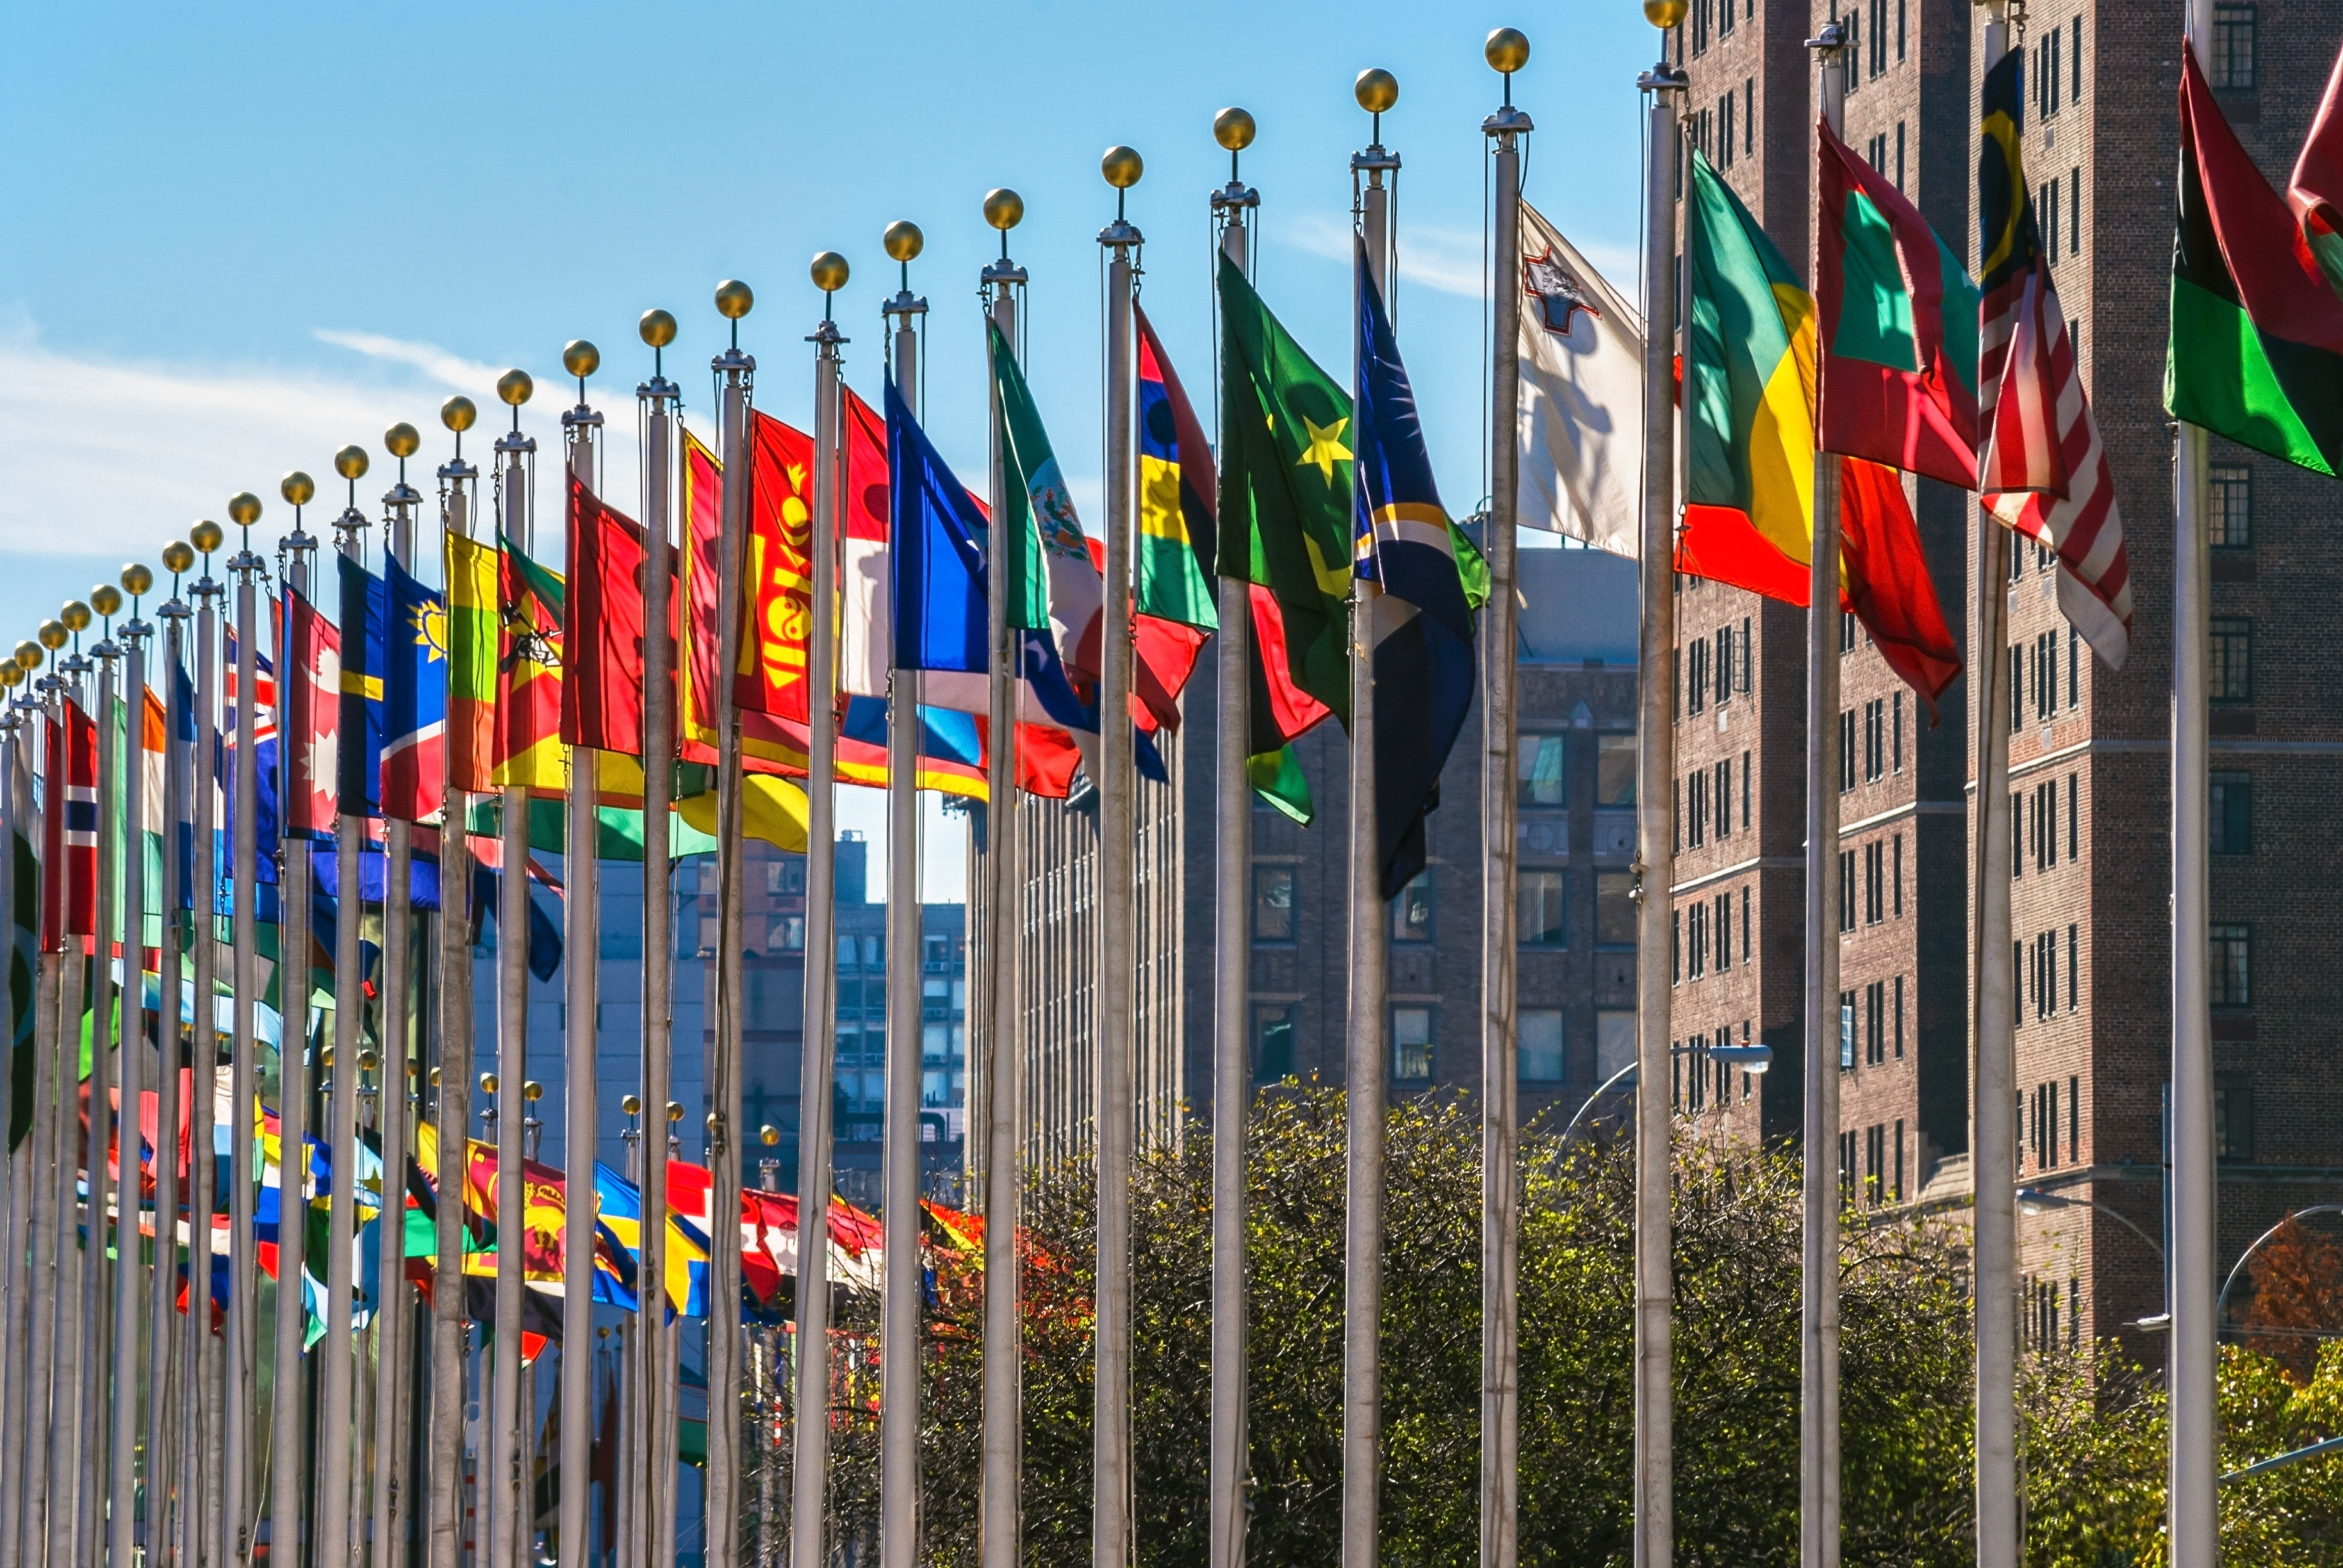 flags of world countries on line of flagpoles